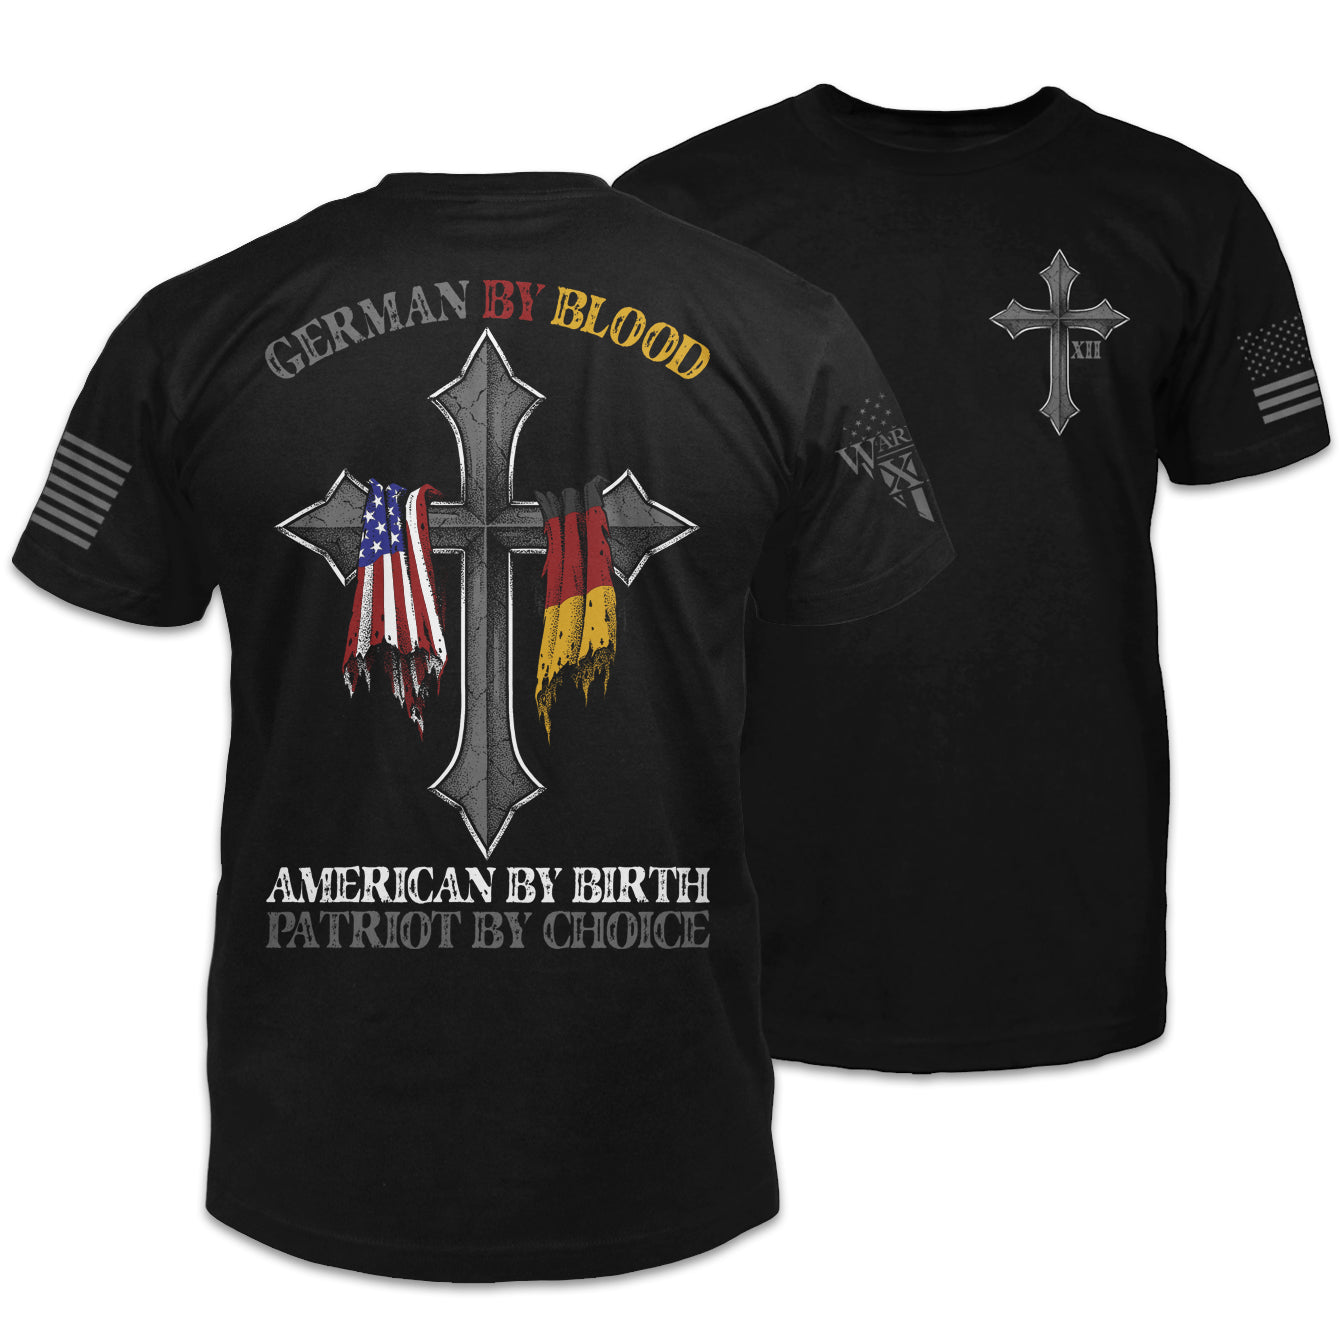 Front & back black t-shirt with the words 'German by blood, American by birth, patriot by choice" and a cross with the German and USA flag hanging over it printed on the shirt.